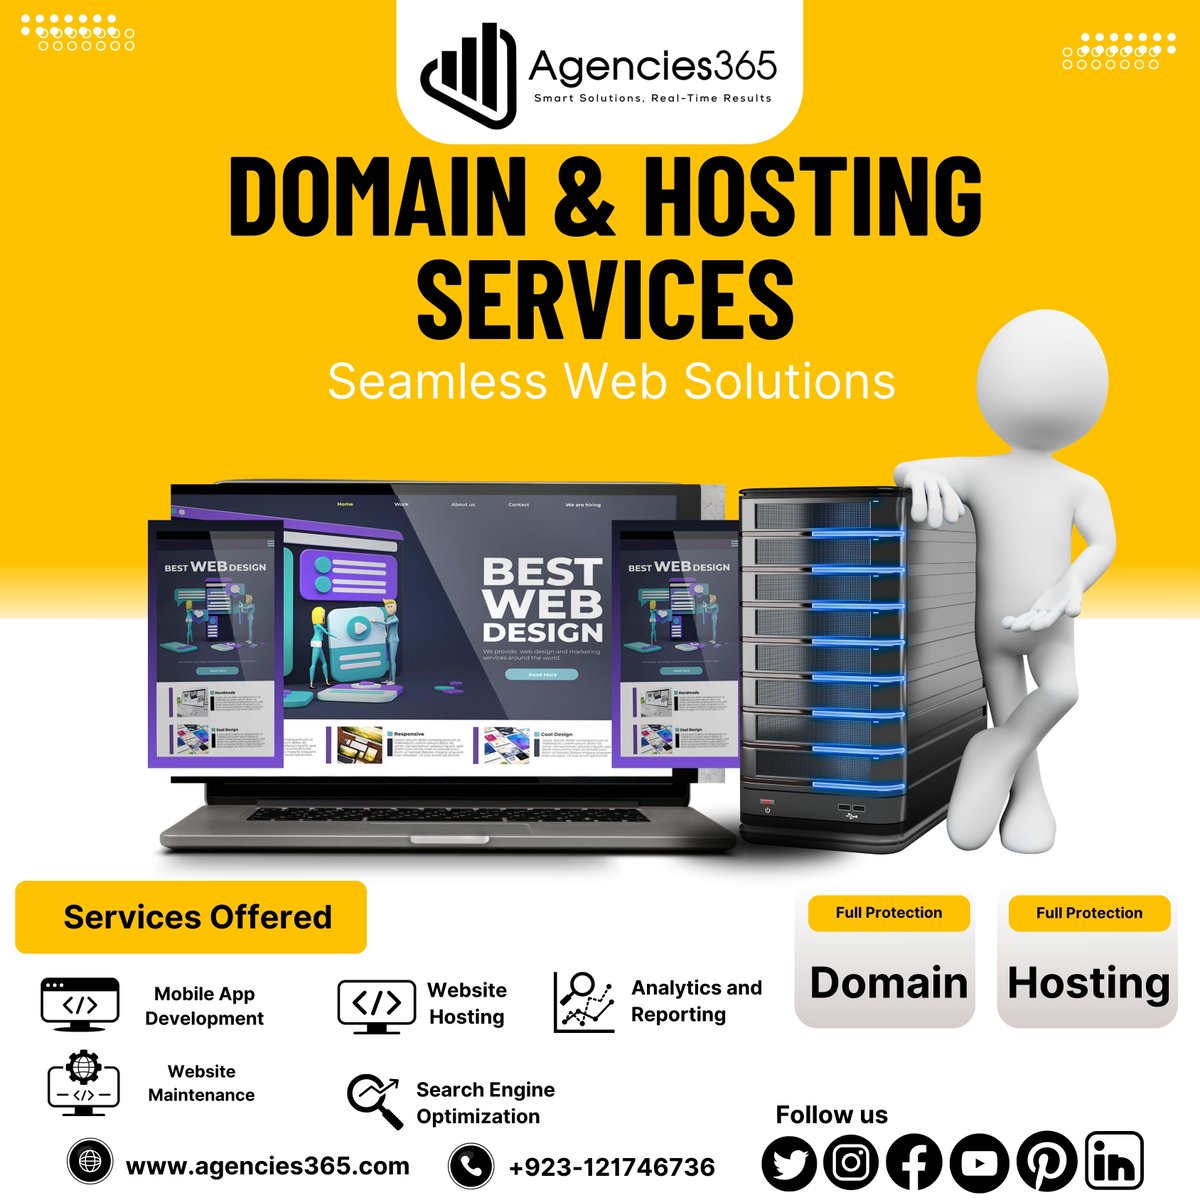 🌐 Looking to bring your website dreams to life? We've got you covered! 🚀
🔥 Introducing our top-notch Domain and Hosting Services 🔥
 #WebHosting #DomainRegistration #WebsiteSolutions #OnlinePresence #TechSupport #agencies365 #Mujahidfalak